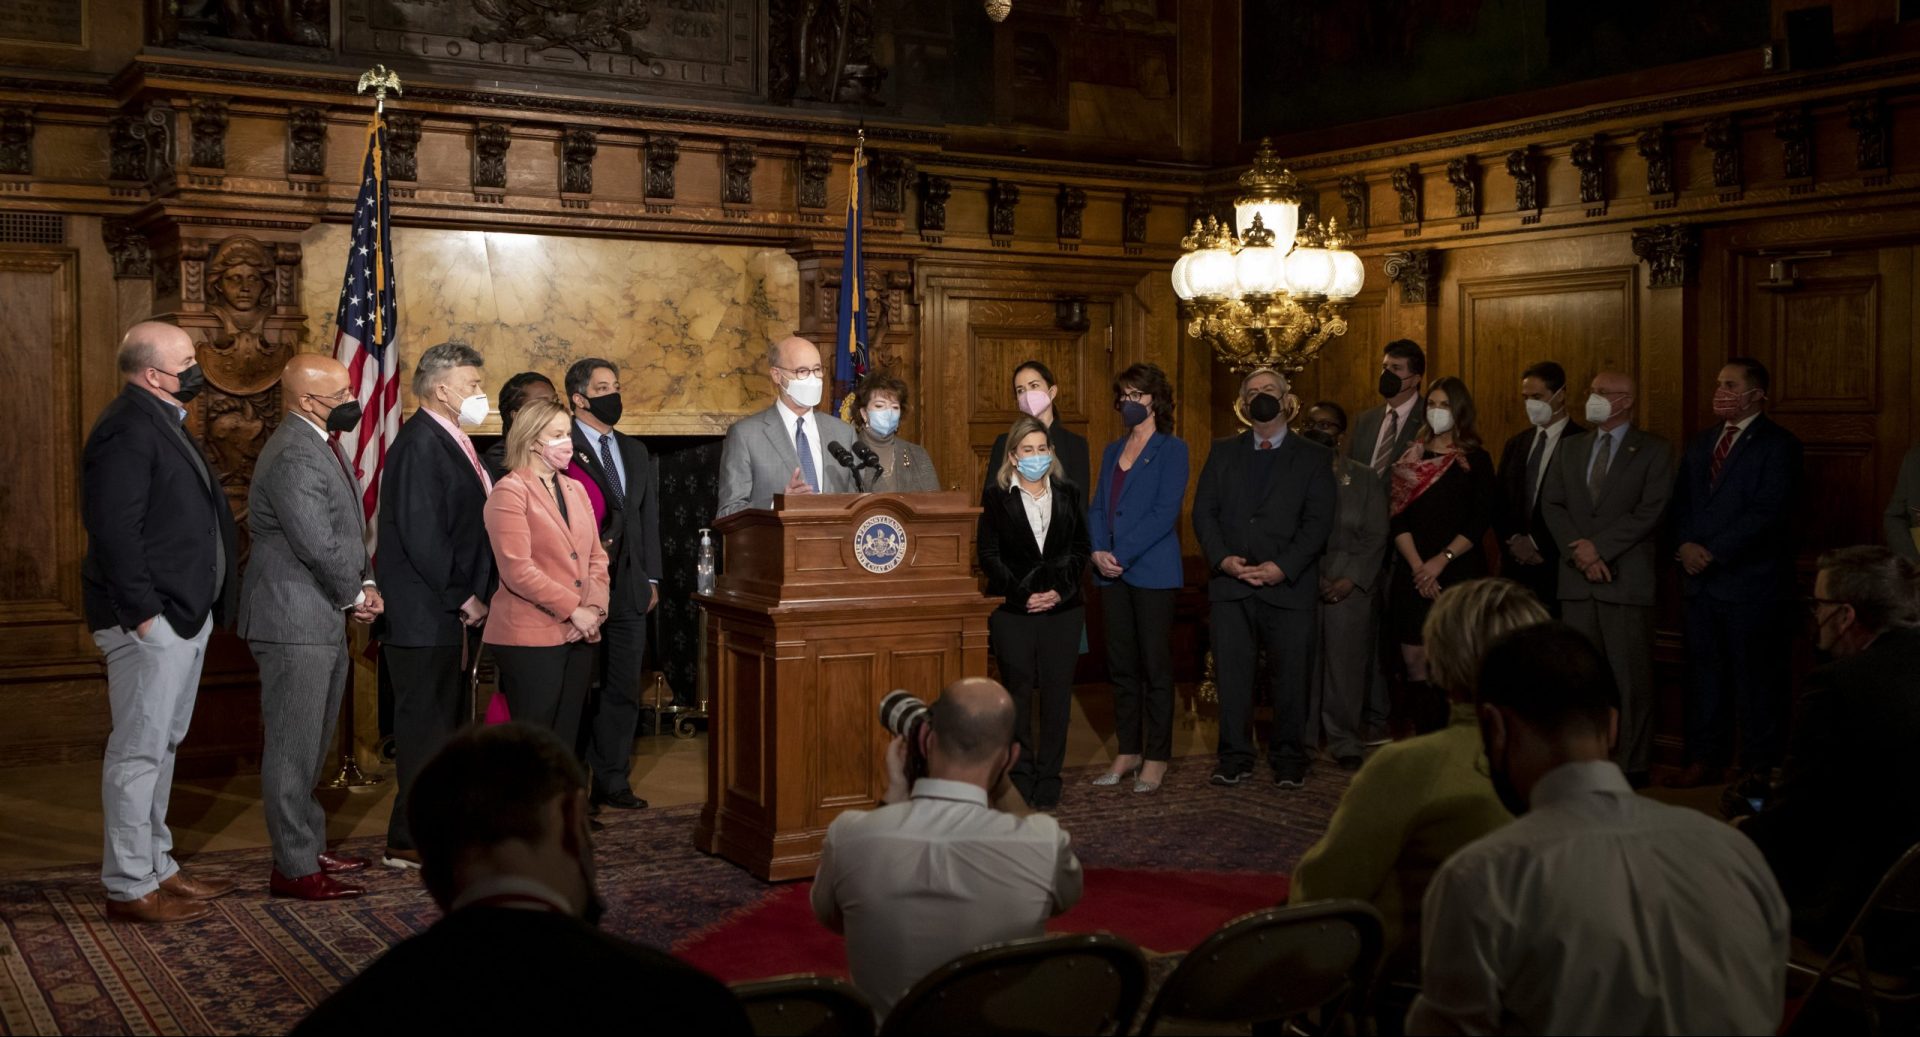 Governor Tom Wolf and bipartisan legislators announces continued support of the commonwealth's health care workforce through the bipartisan House Bill 253, designating $225 million for emergency support of health care employees.